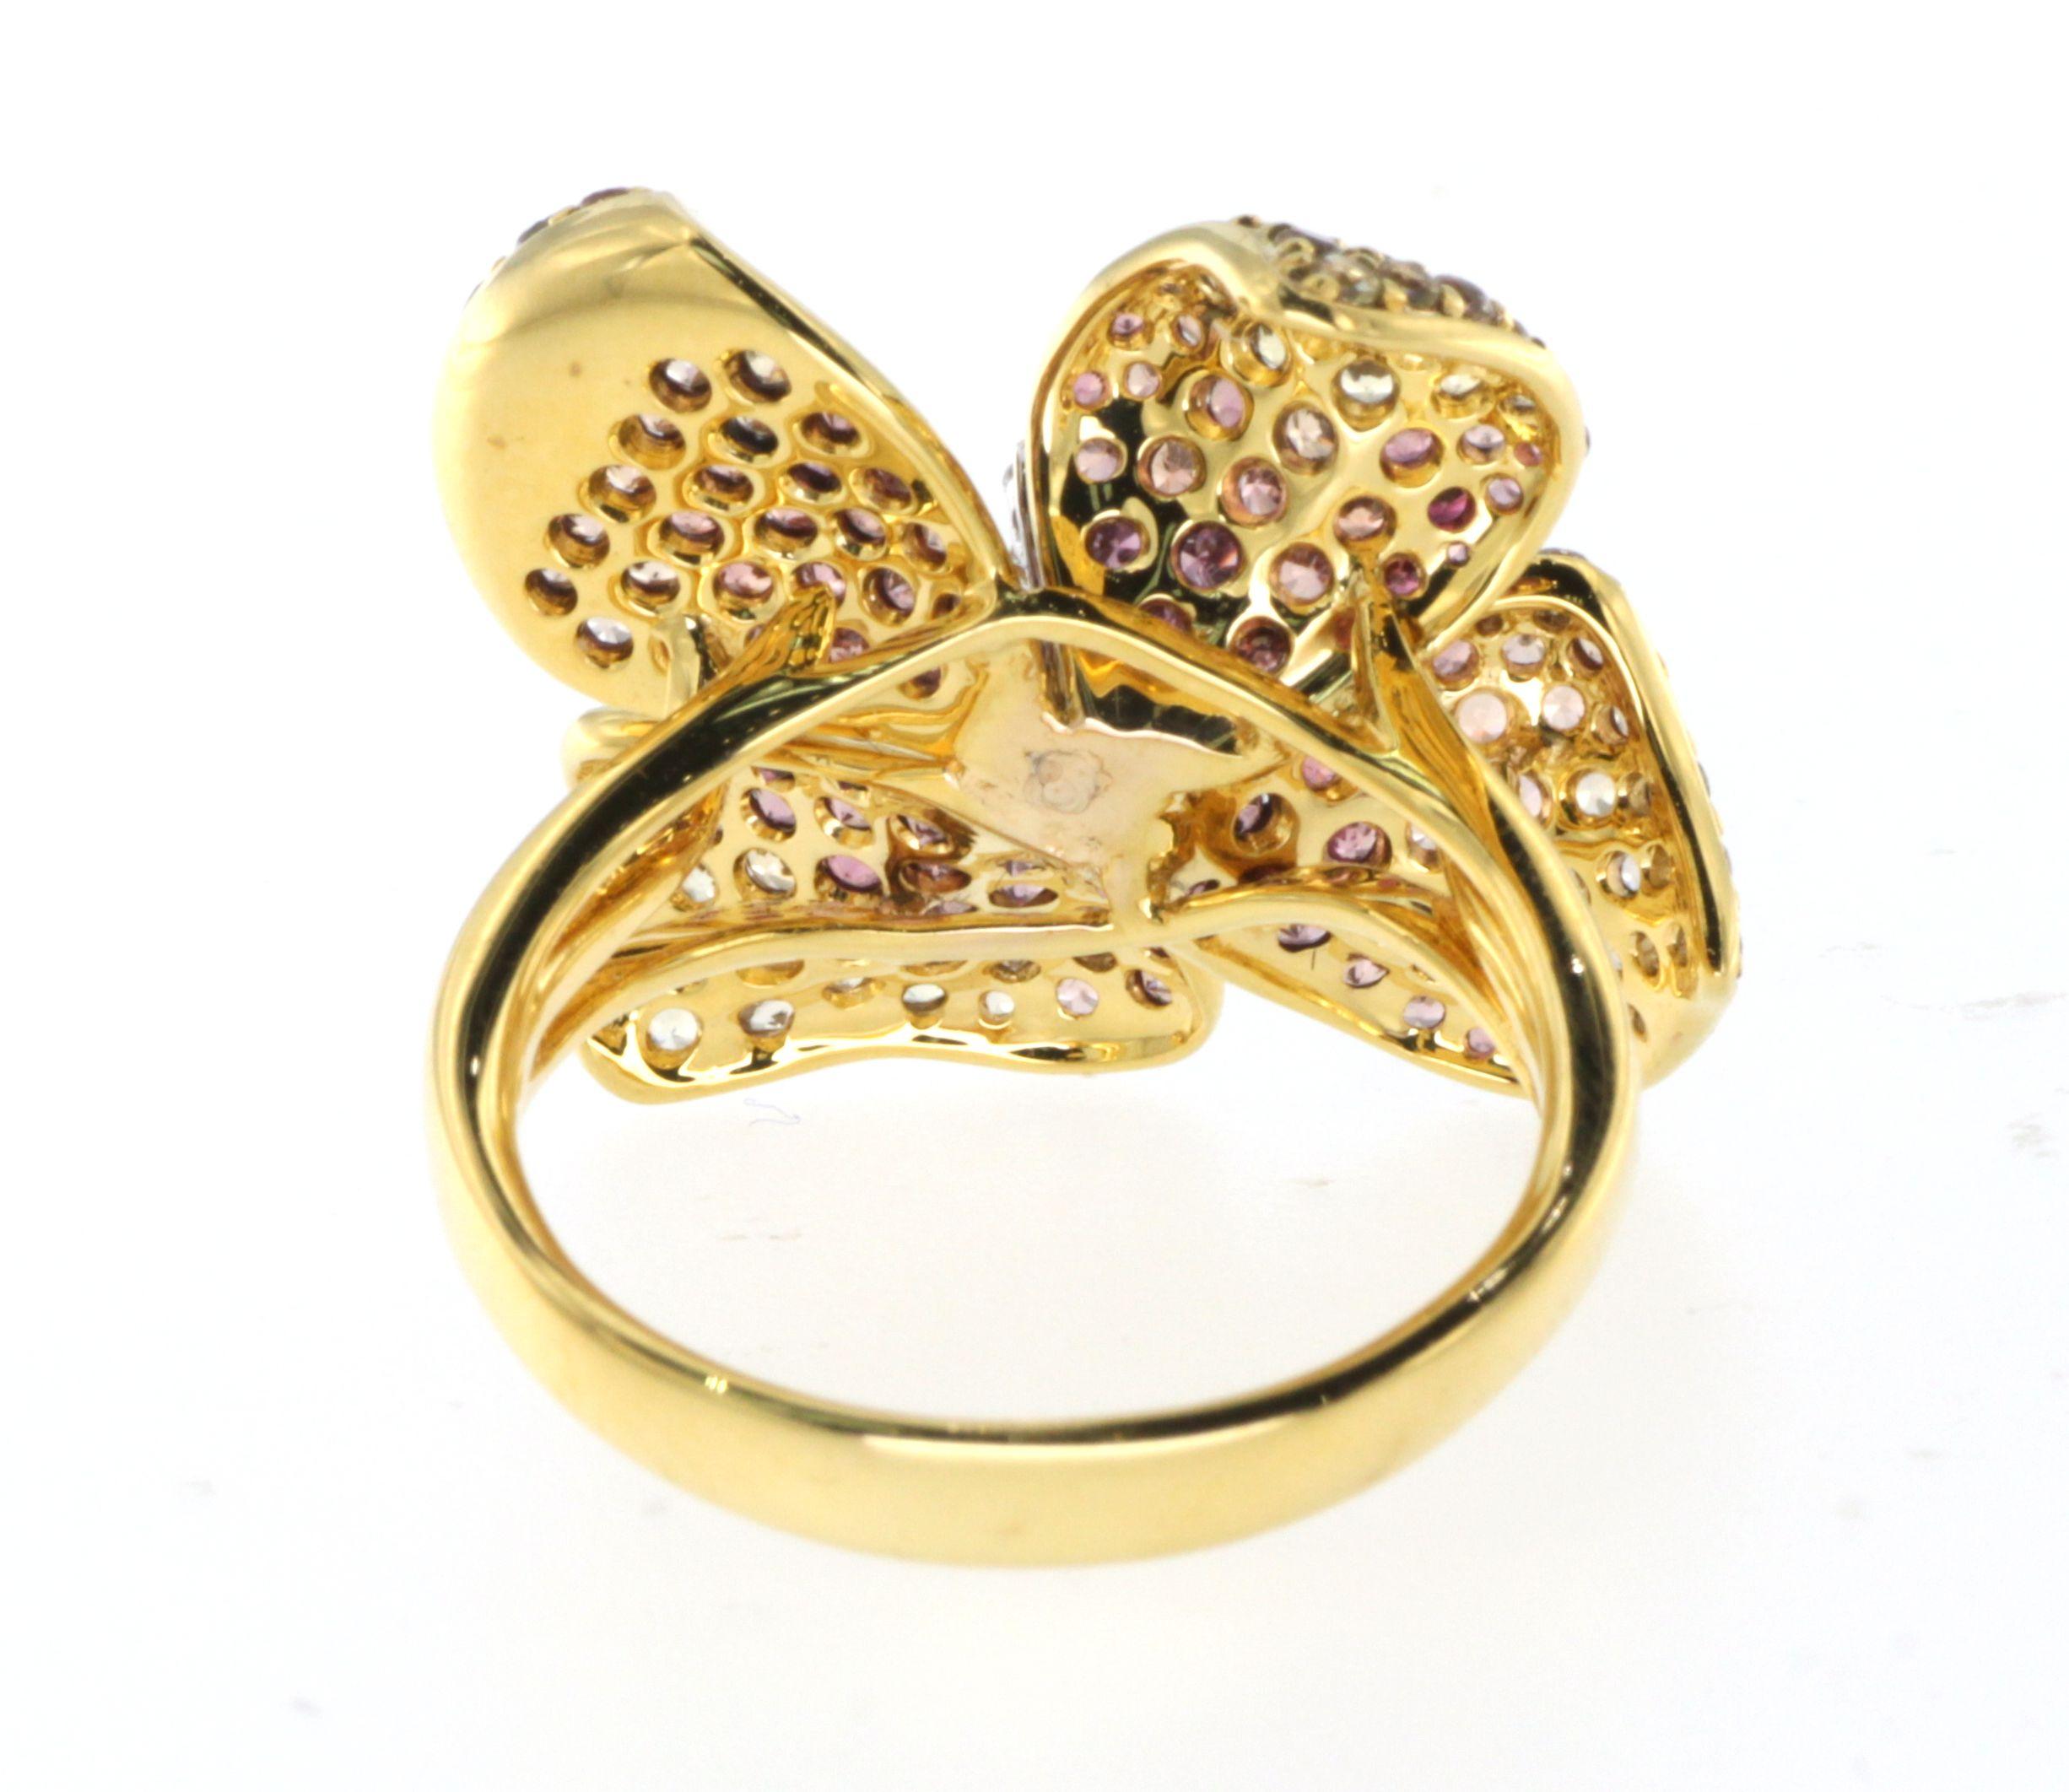 Contemporary Sapphire and Diamond Flower Ring in 18K Yellow Gold